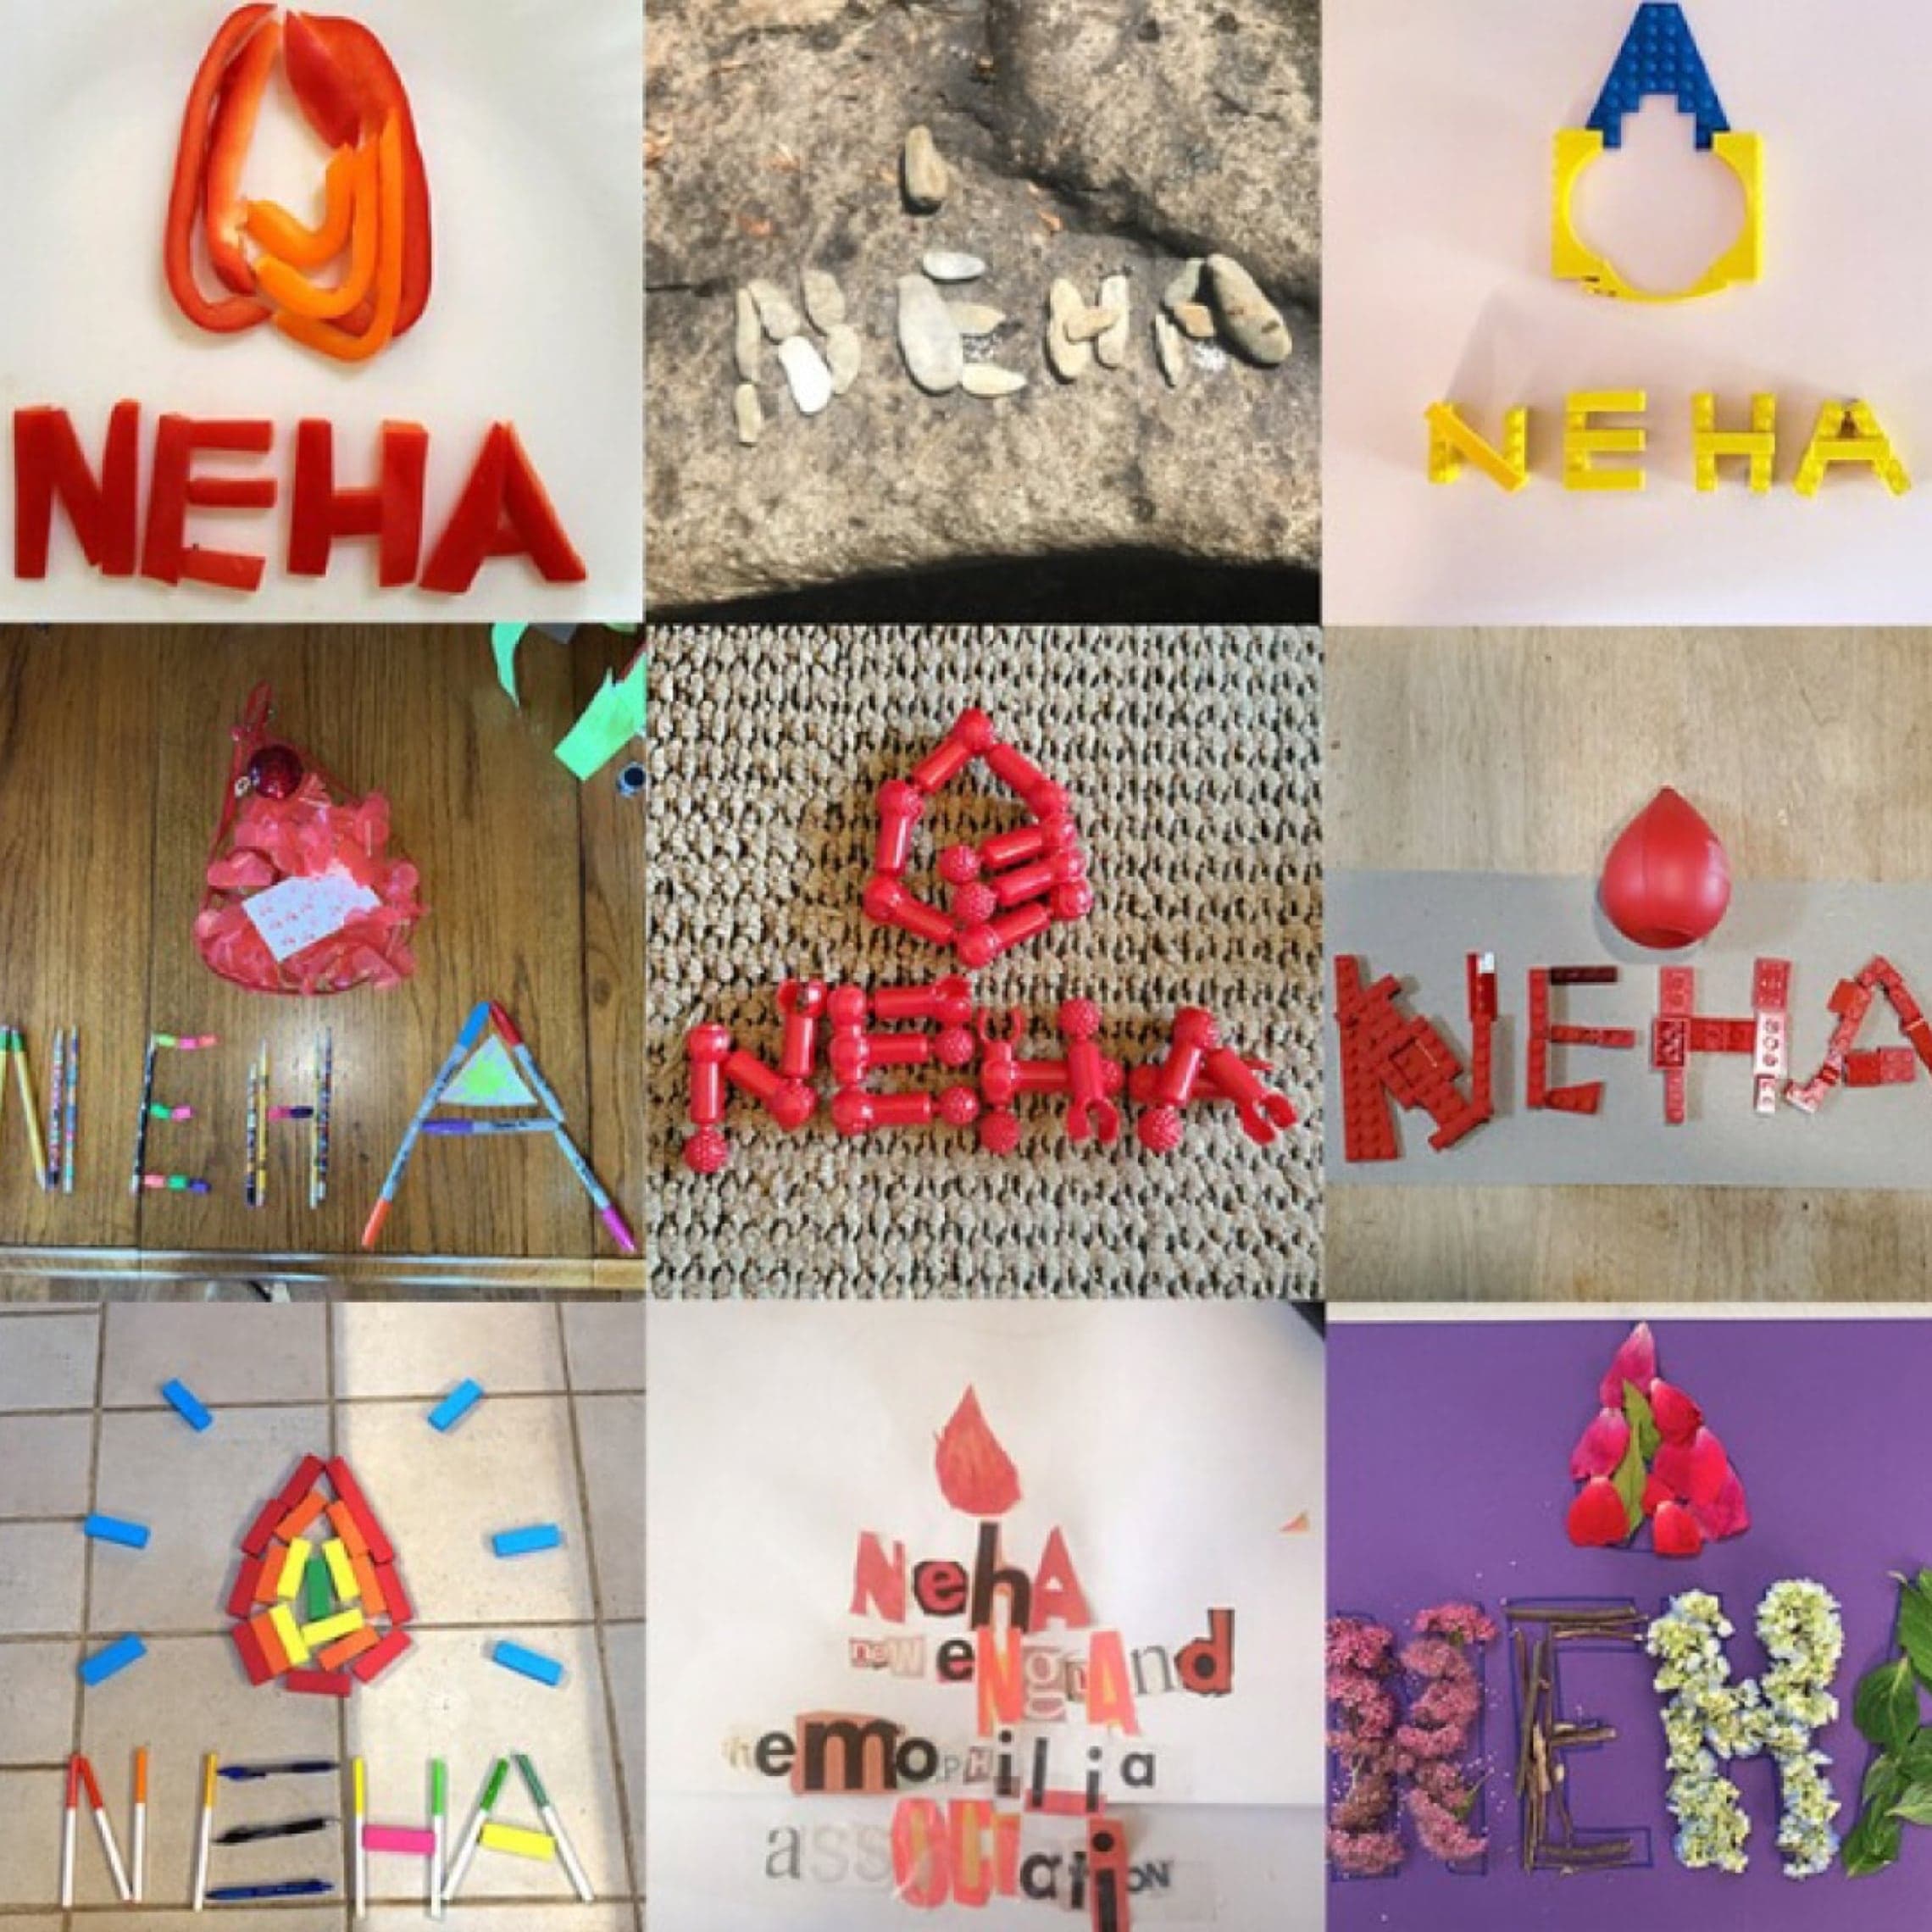 a collage of photos of various Neha logos made with different types of materials